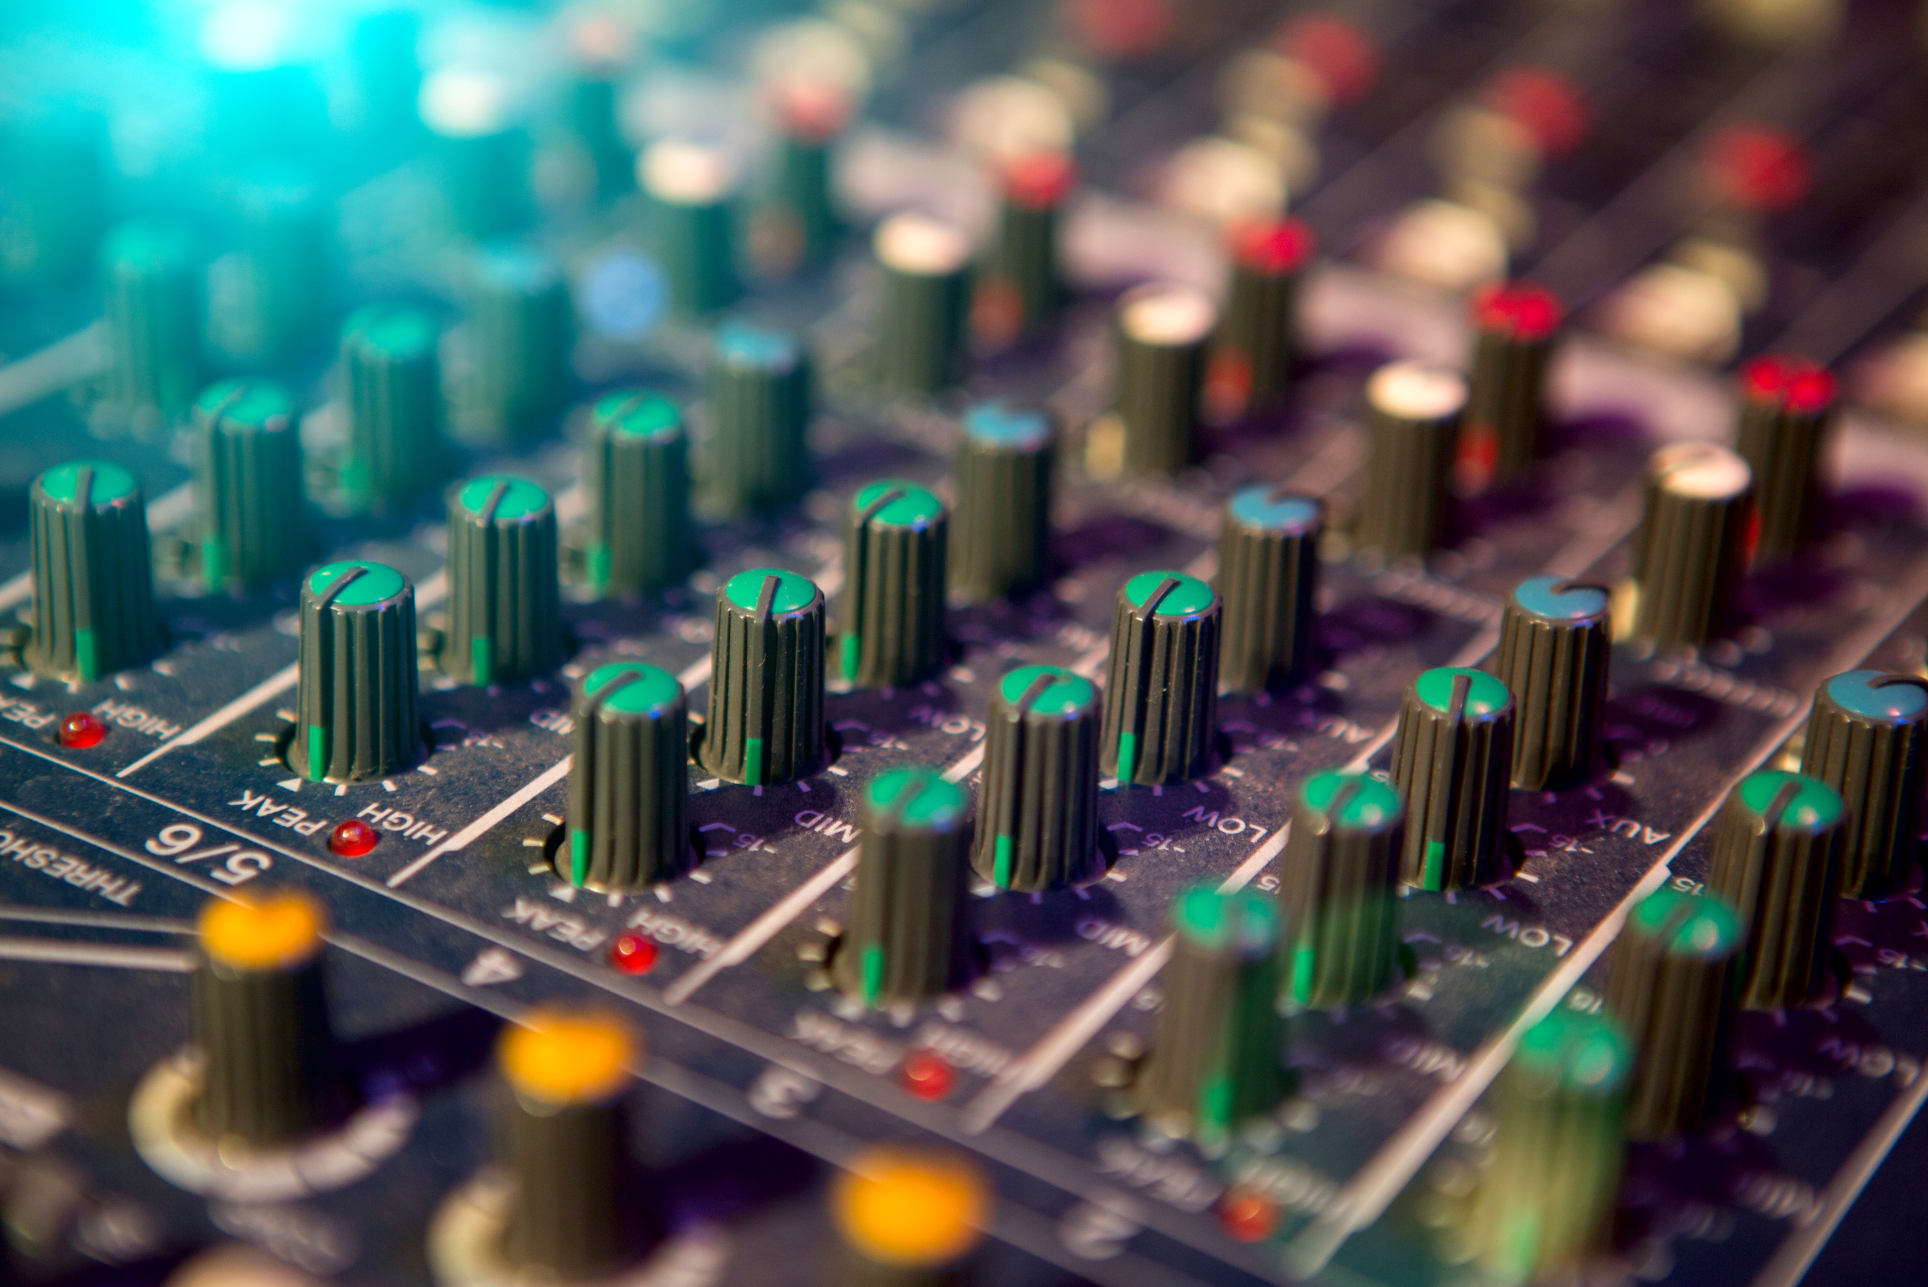 How to Choose the Perfect Live Sound Mixer for Your Needs